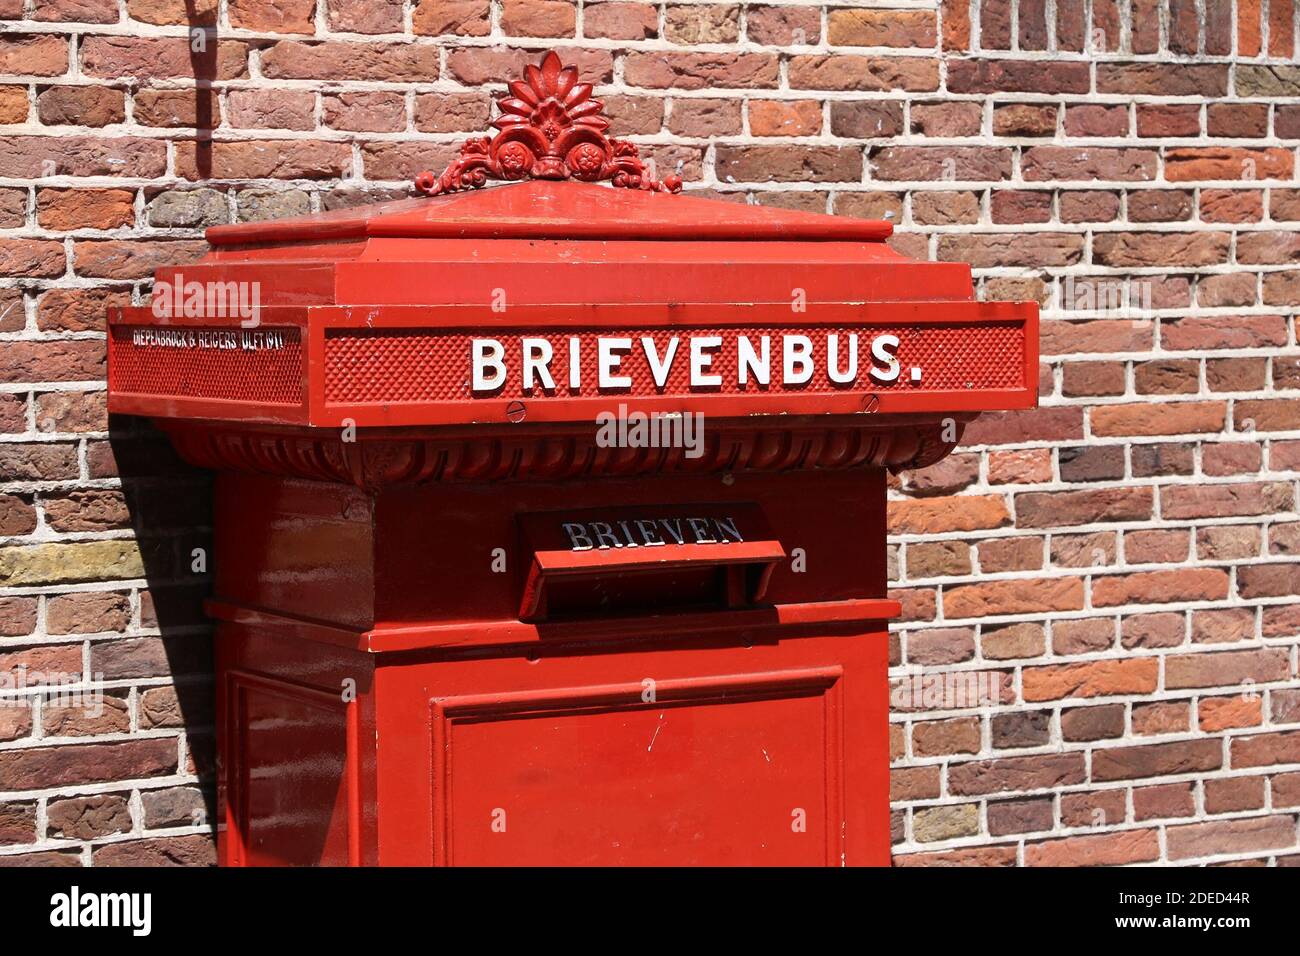 National Postal Service High Resolution Stock Photography and Images - Alamy